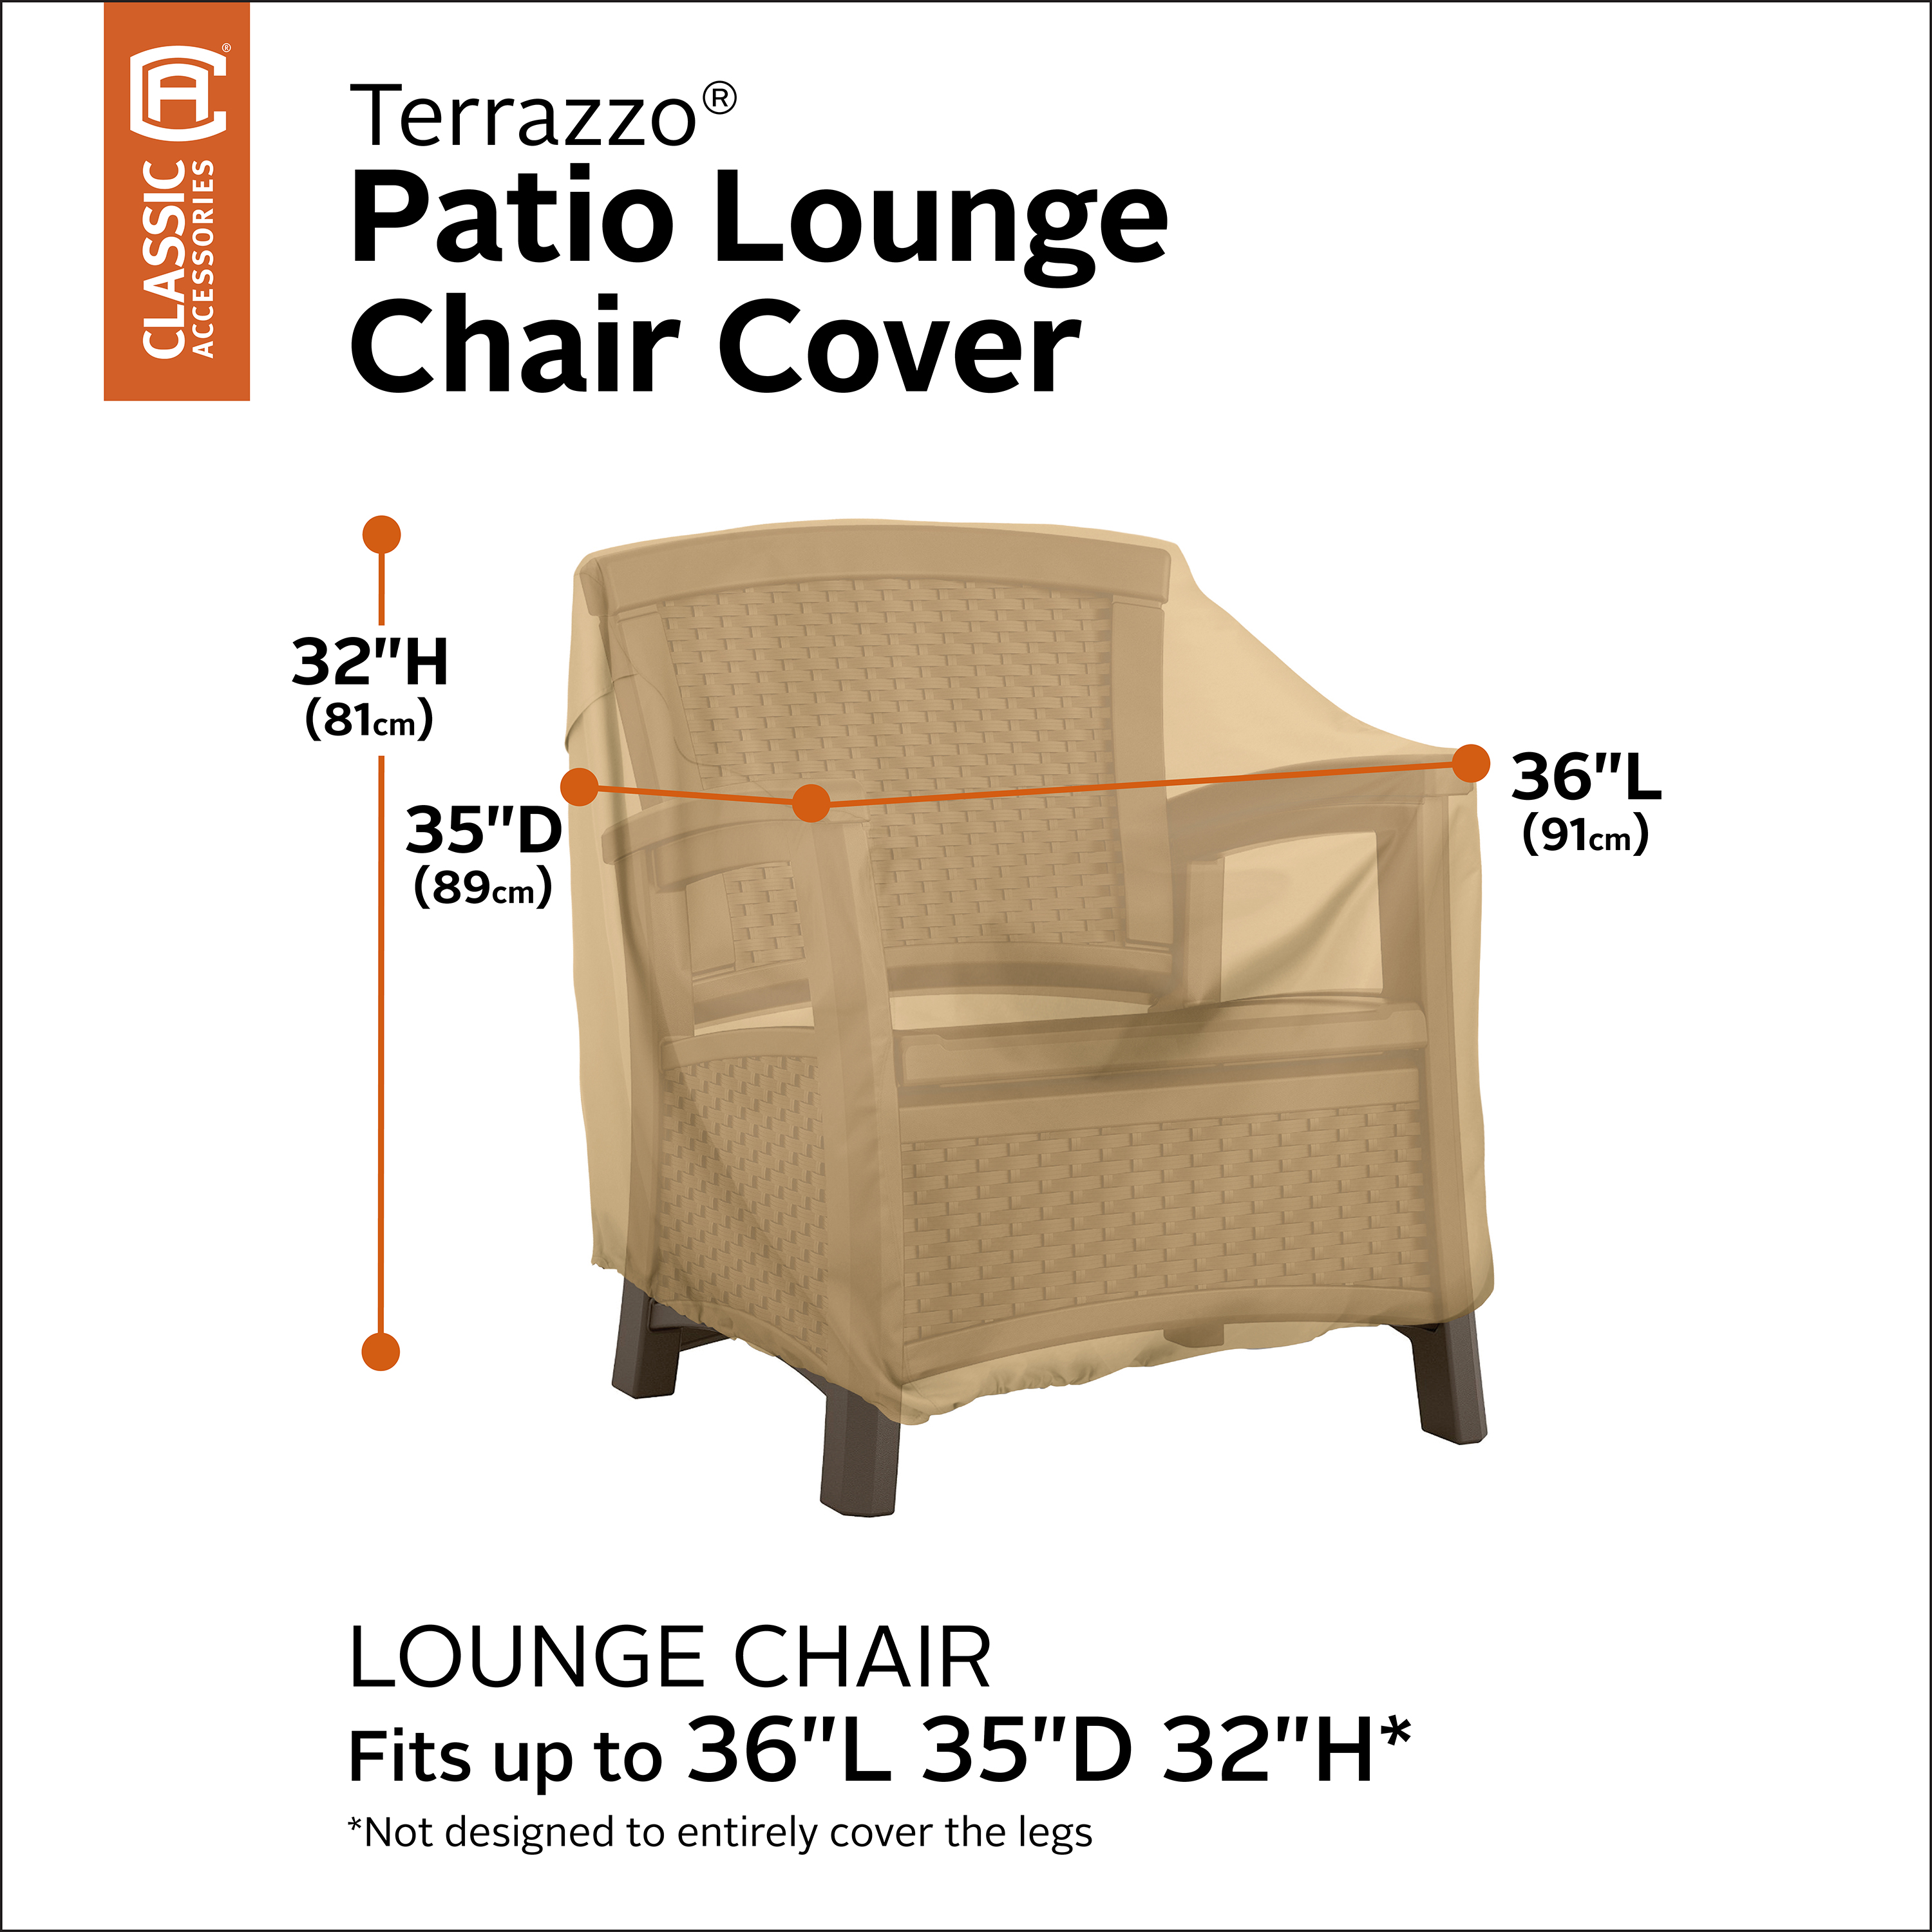 Classic Accessories Terrazzo Water-Resistant 36 Inch Patio Lounge Chair Cover - image 5 of 13